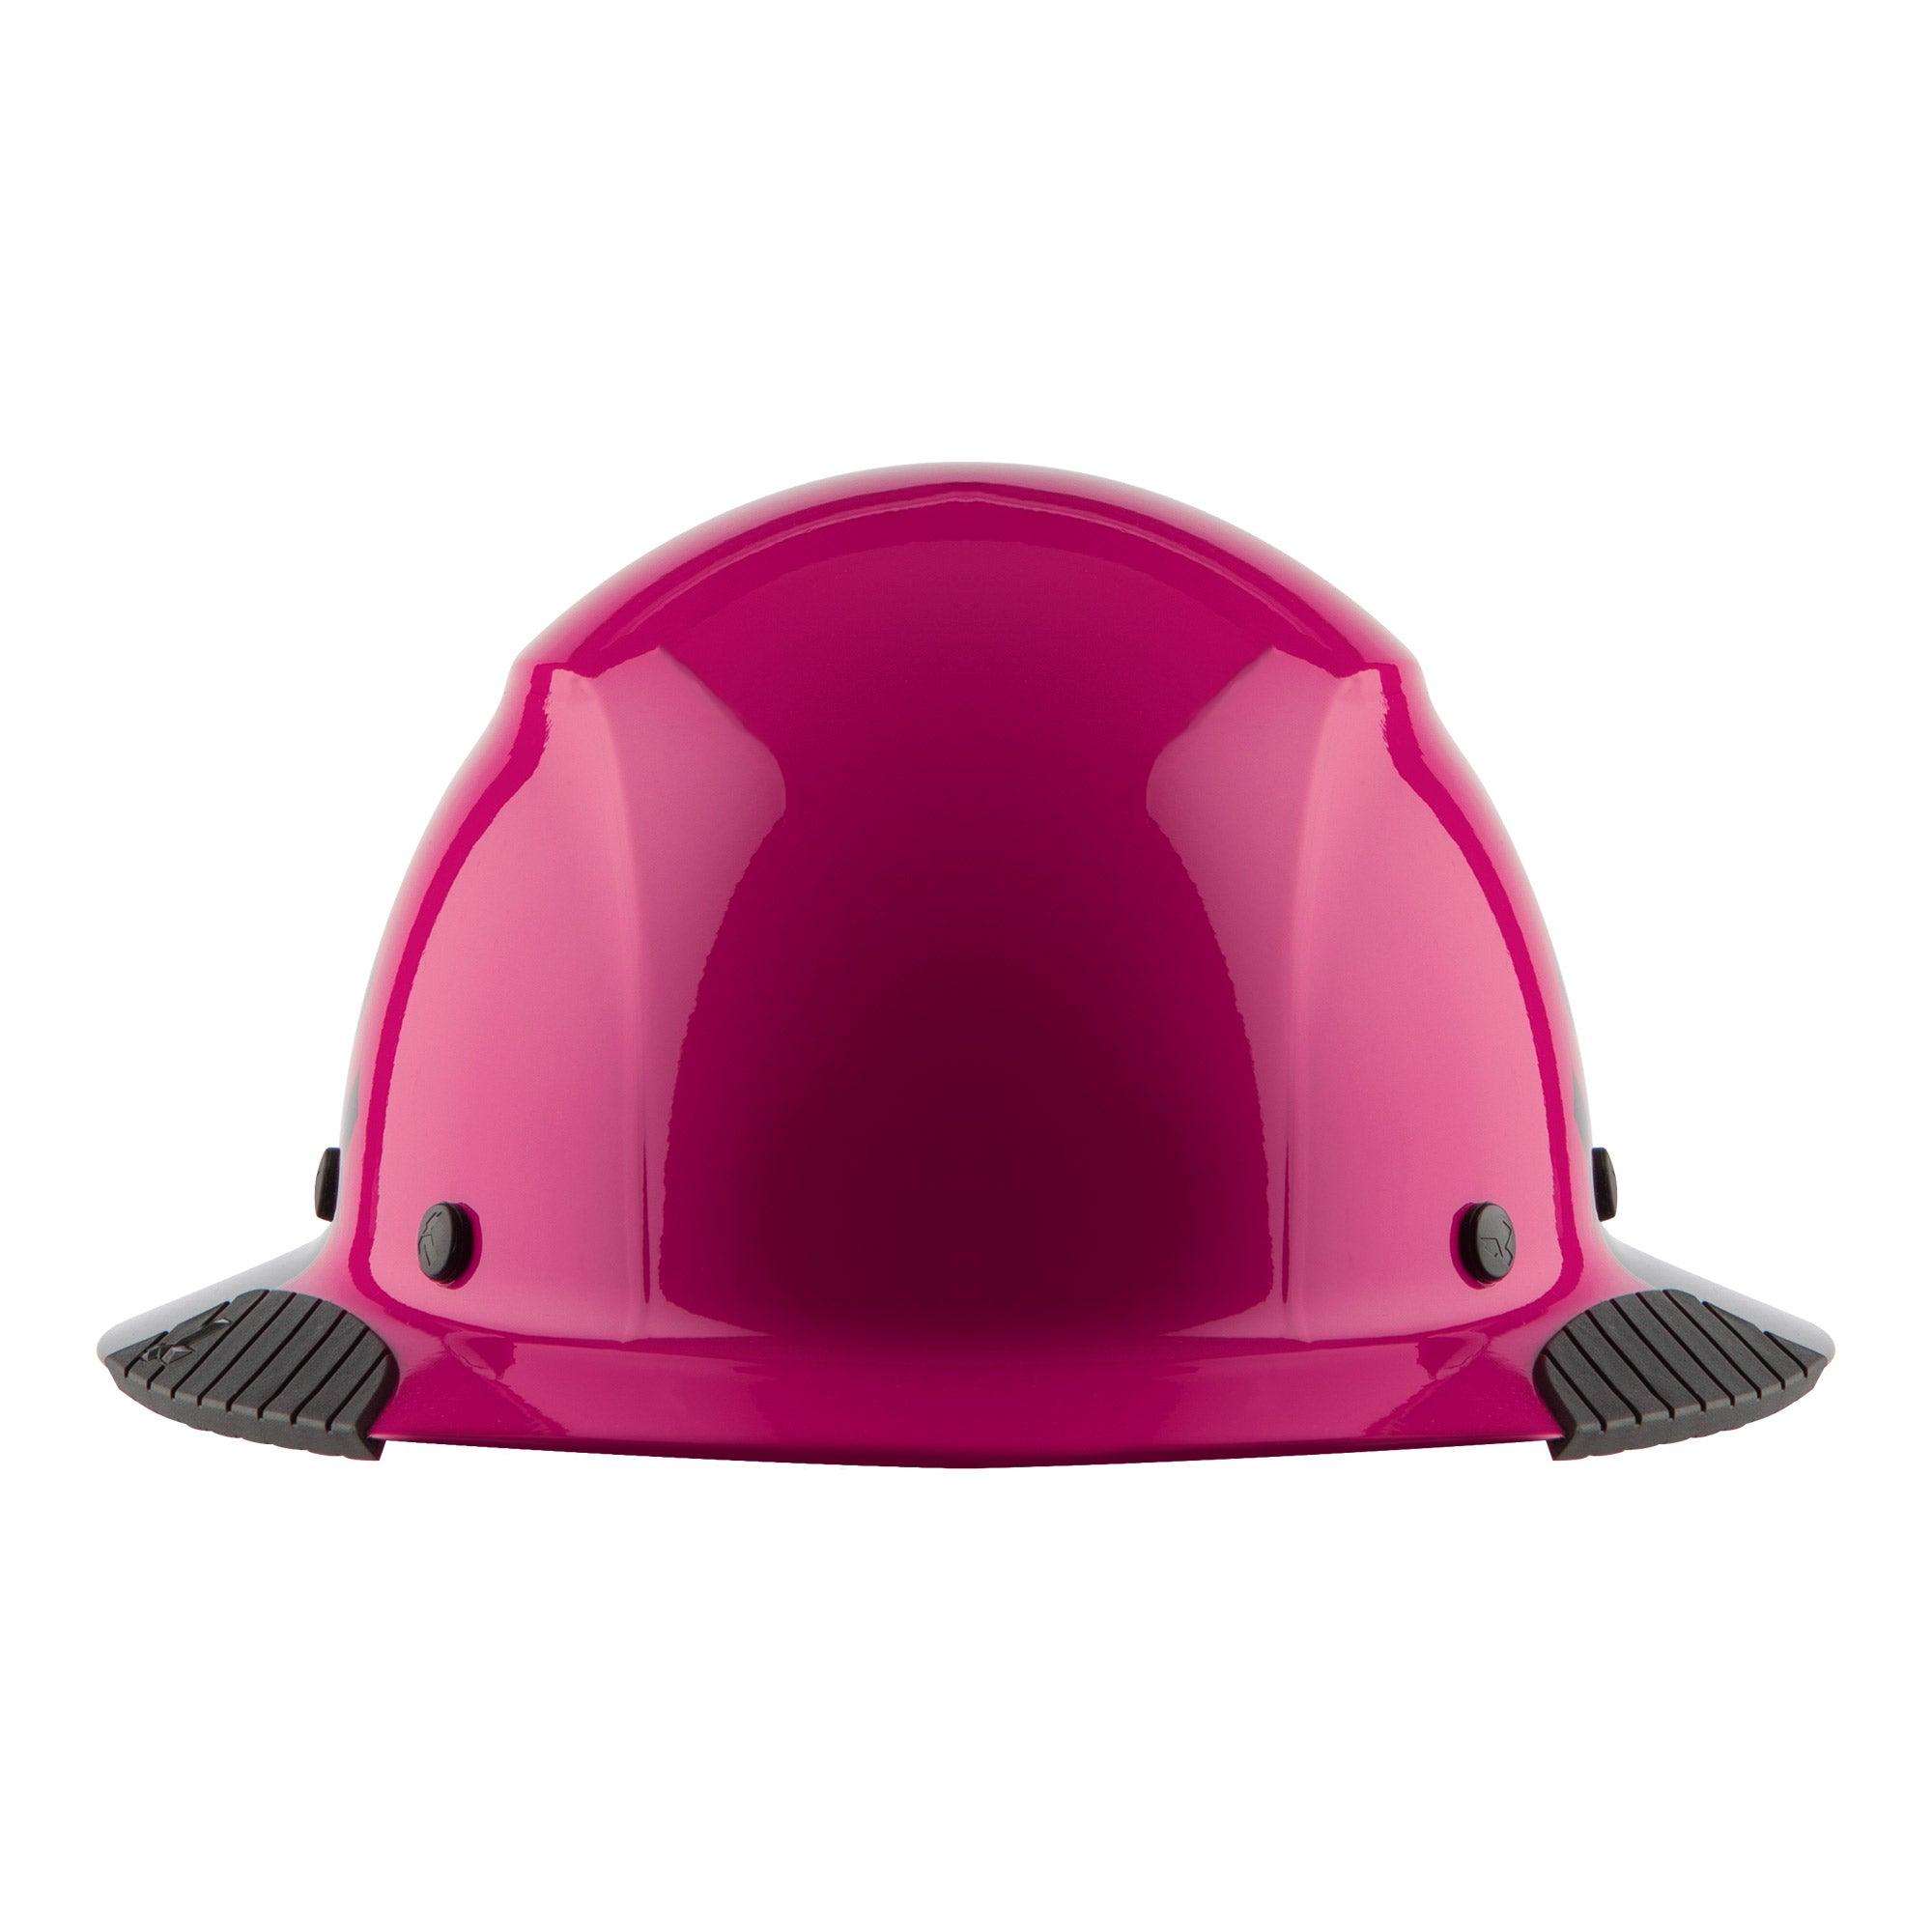 DAX FIFTY50 Fiber Hardhat - Pink / Black - Purpose-Built / Home of the Trades